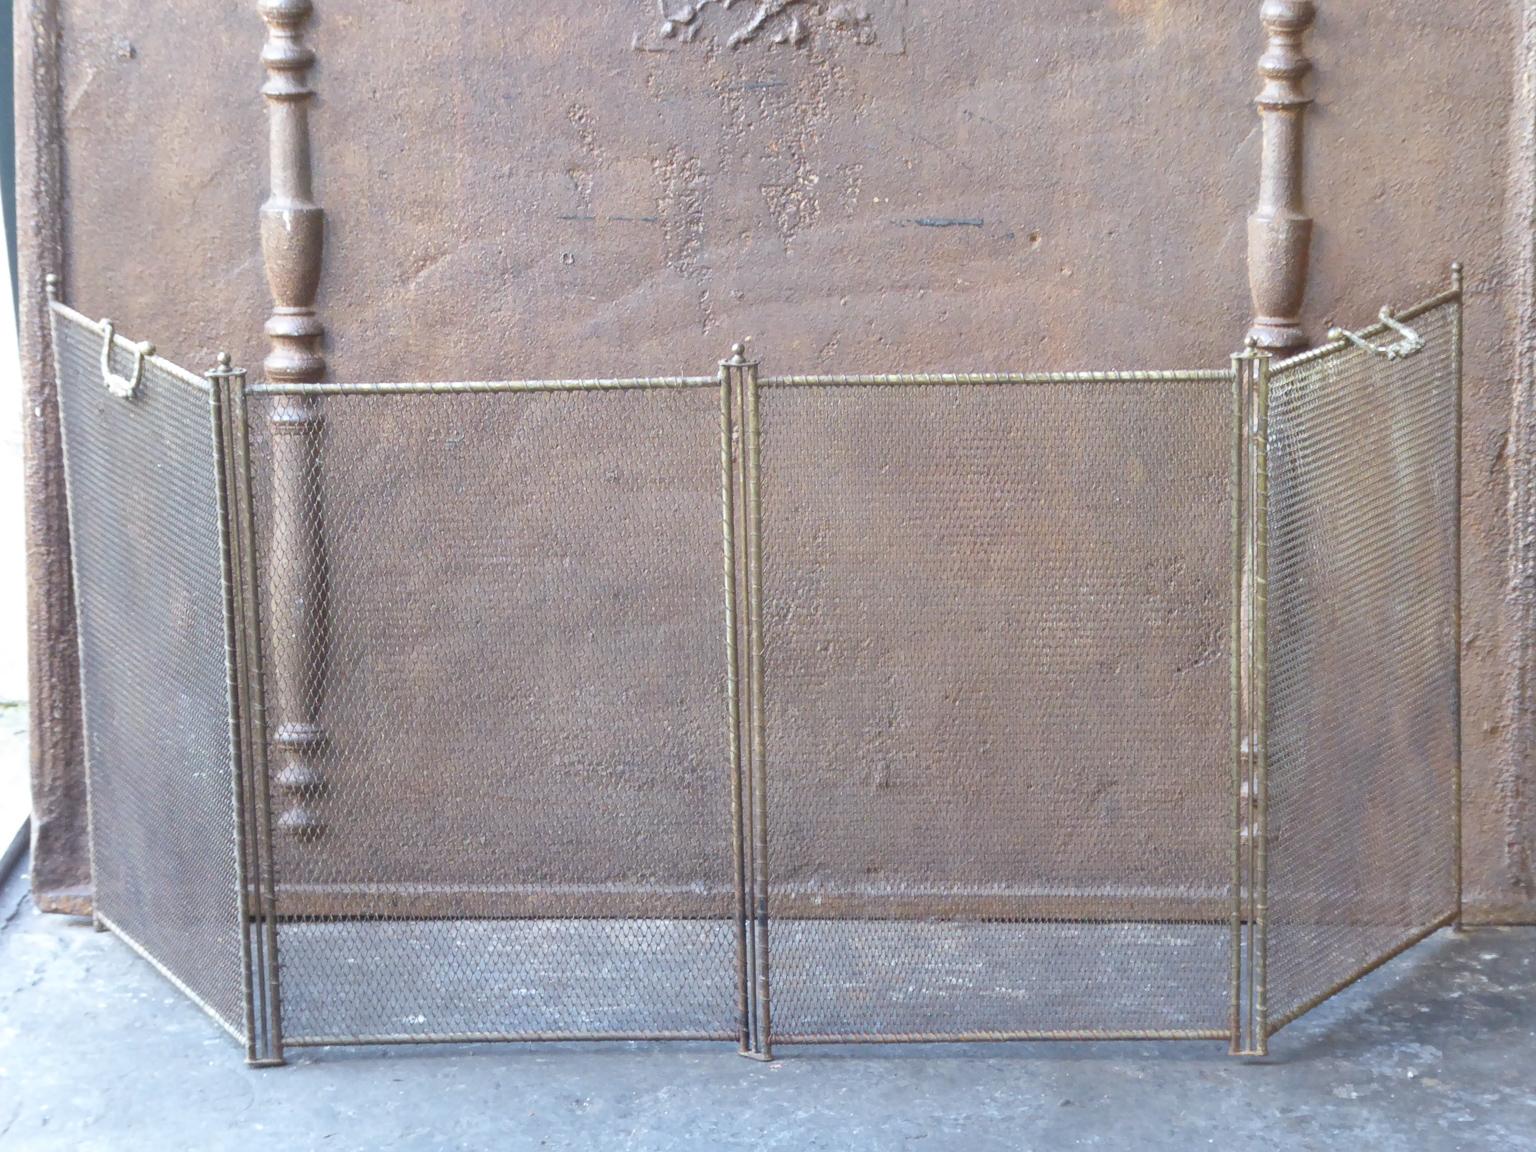 19th century French Napoleon III four panel fireplace screen. The screen is made of brass and iron mesh. It is in a good condition and is fit for use in front of the fireplace.